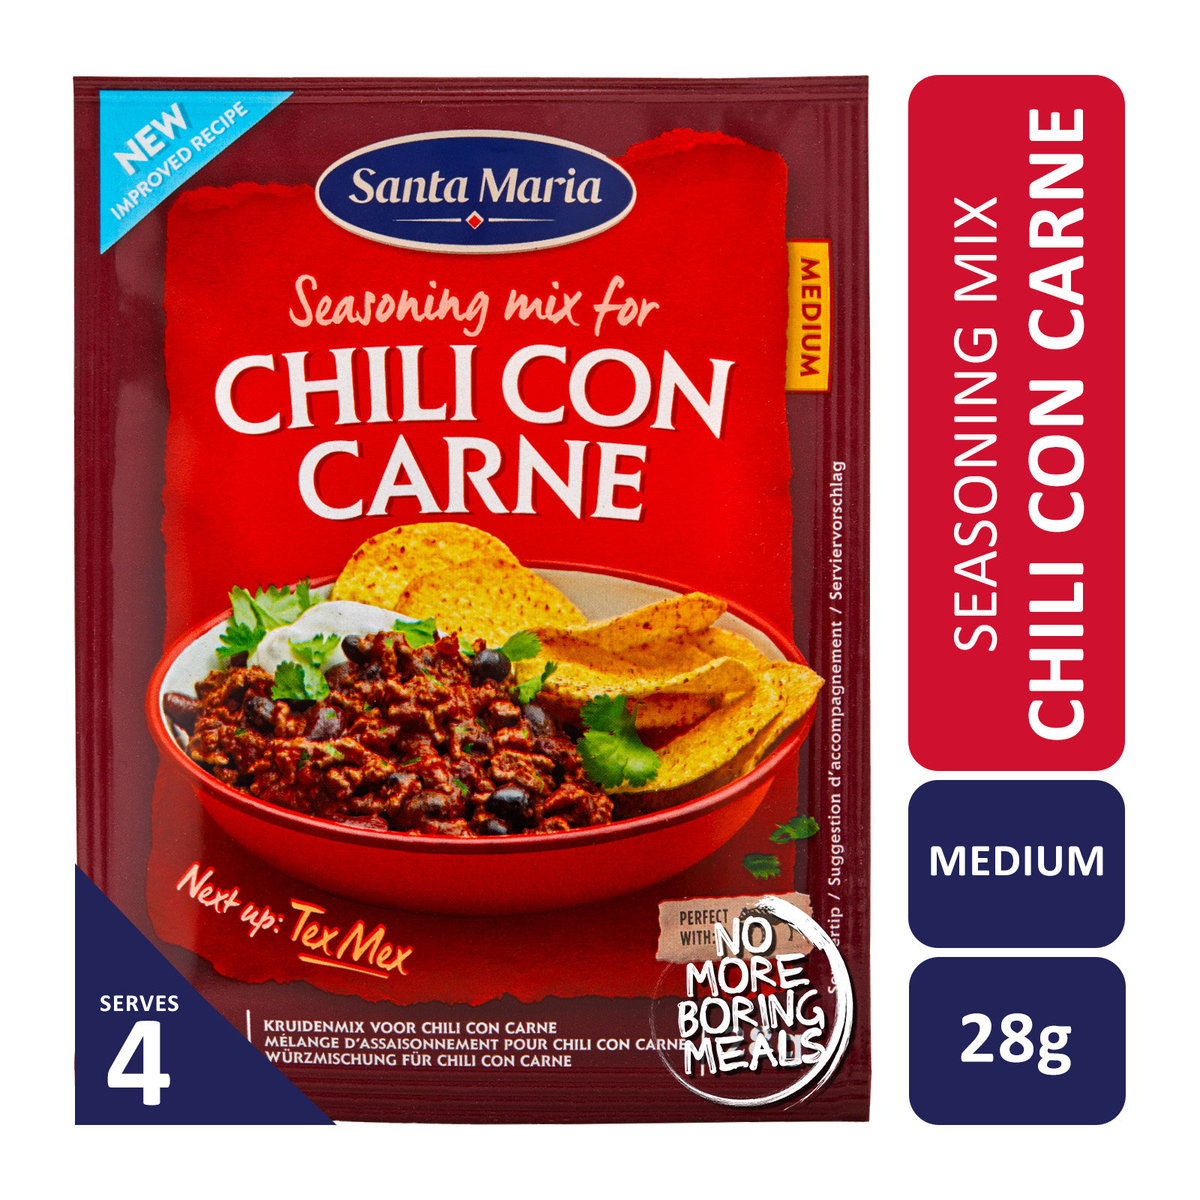 Chili Con Carne Spice Mix 28g (Best before: 21 Aug 2026)